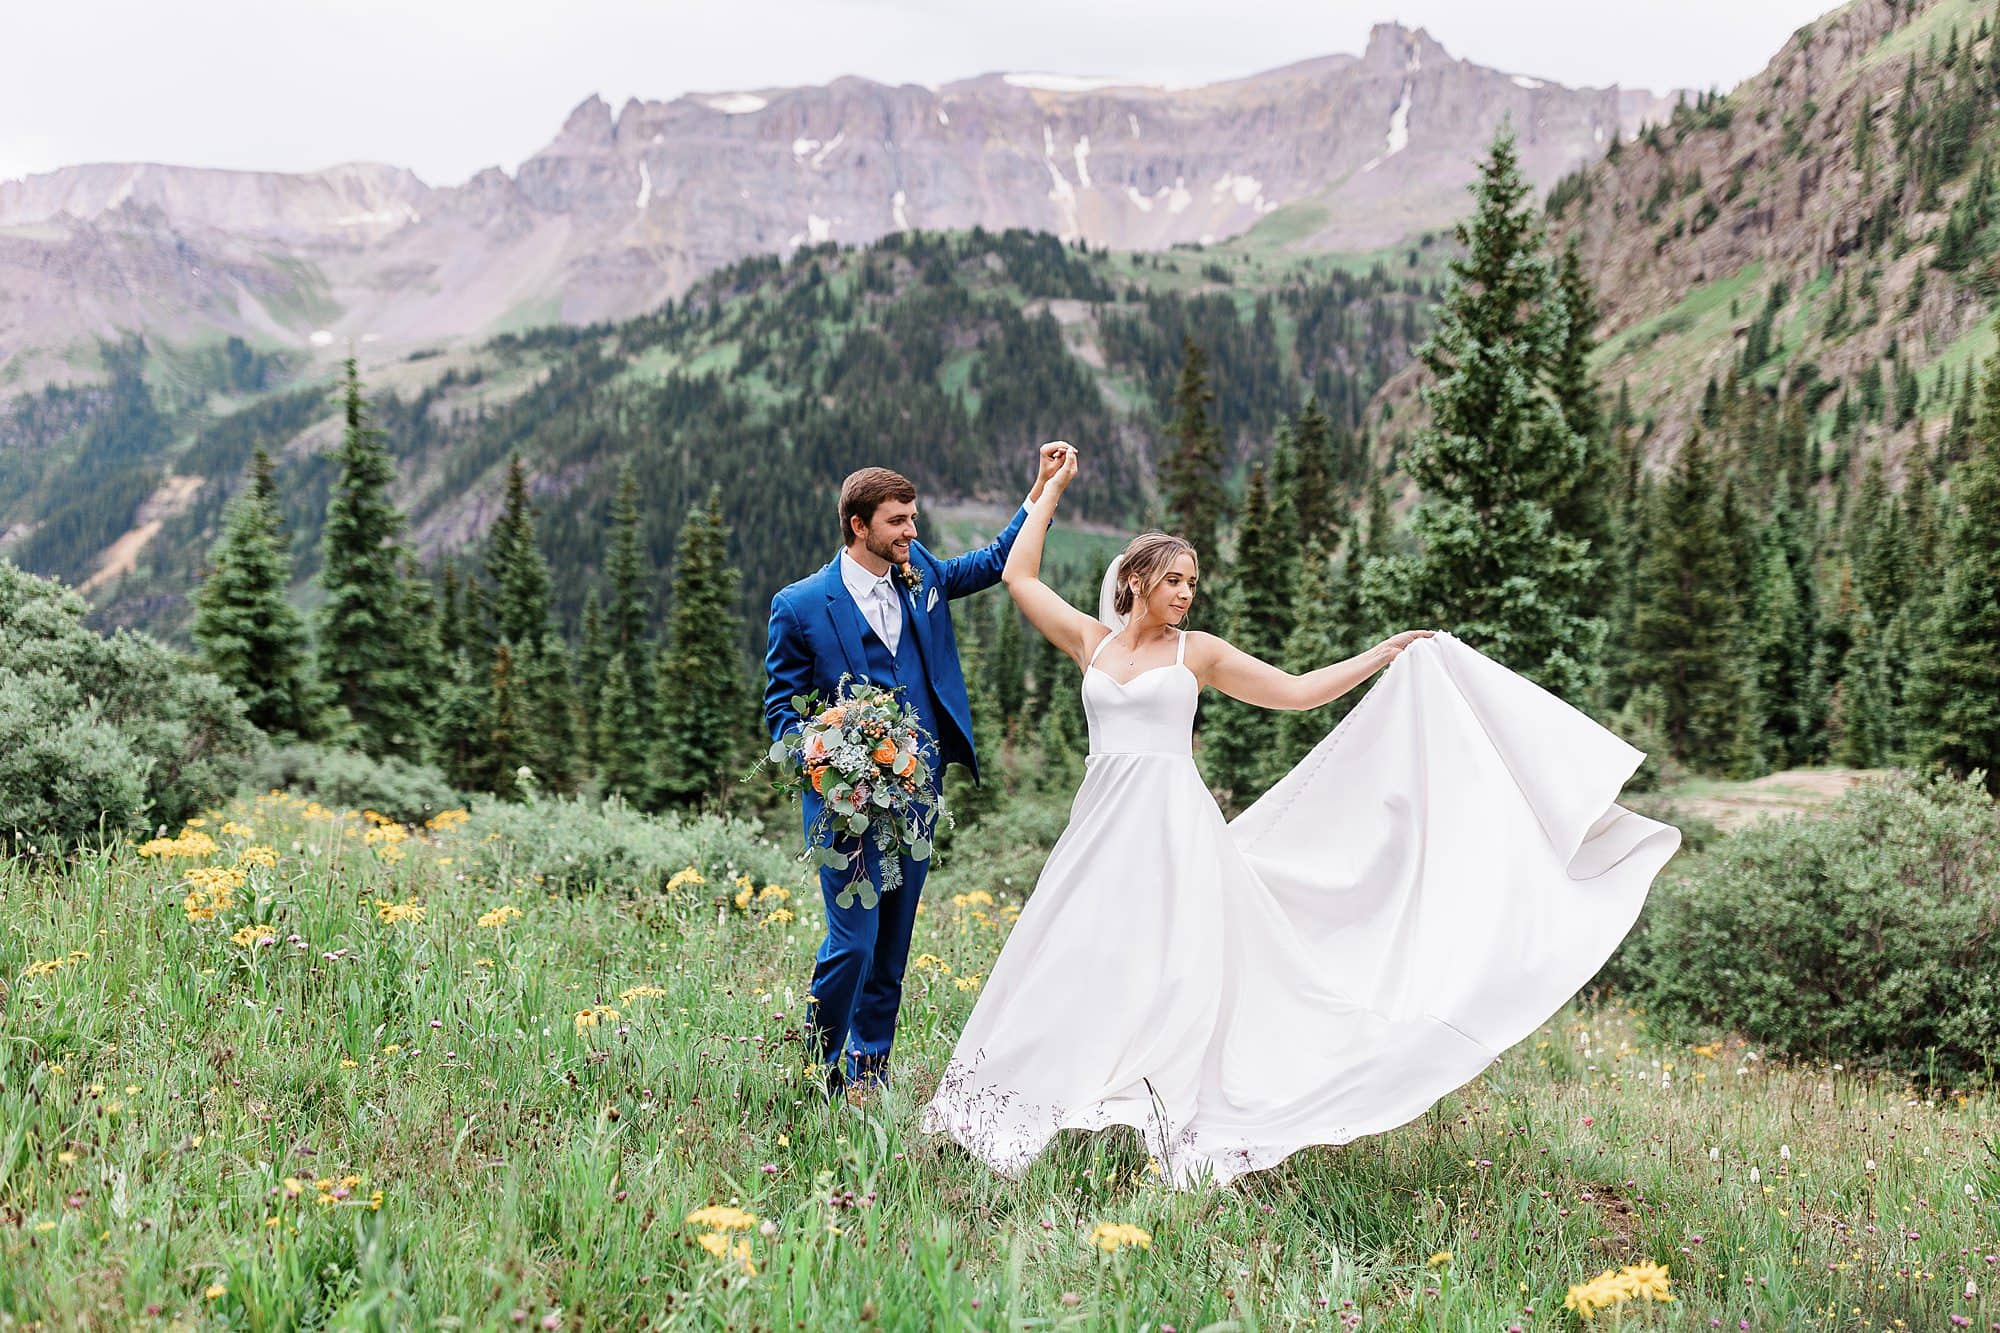 A couple twirls in wildflowers during their elopement hike in the Rocky Mountains